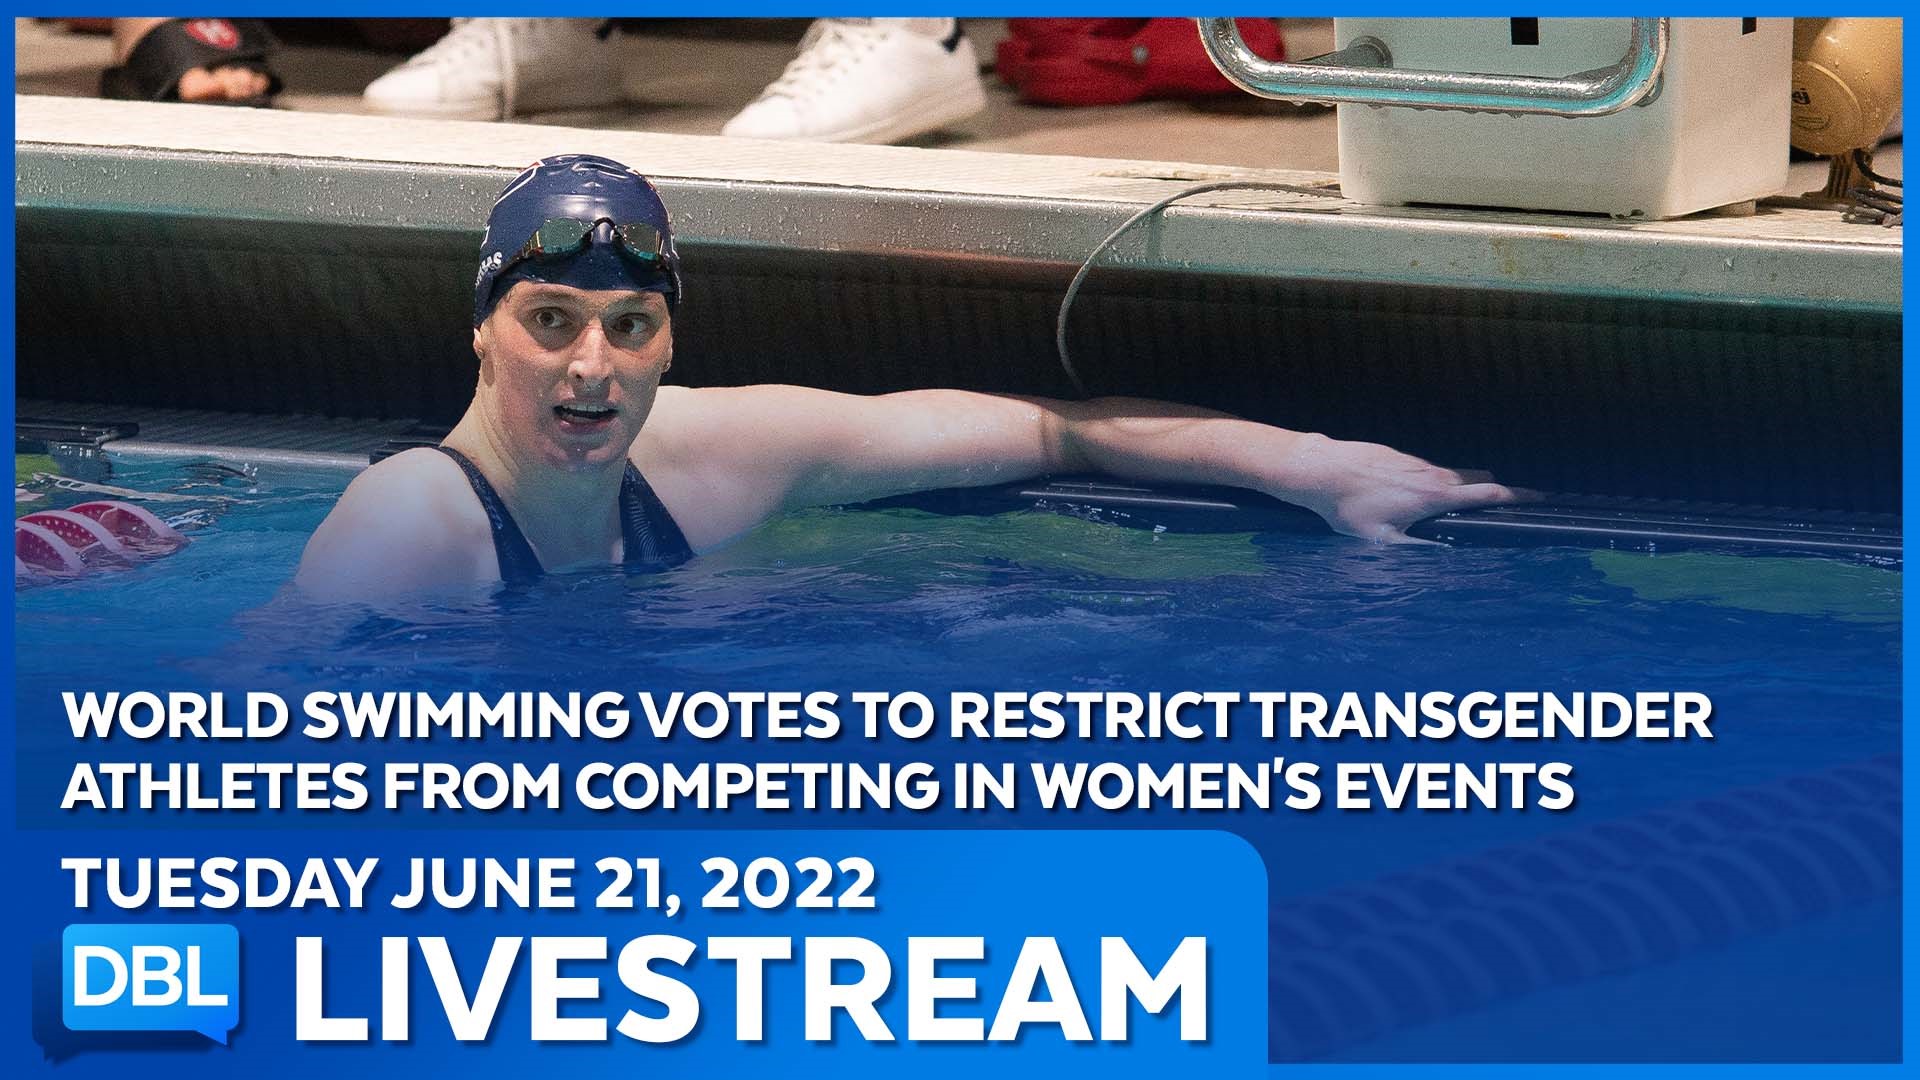 Violence in politics; new rules for transgender swimmers; Elon Musk's daughter disowns him.